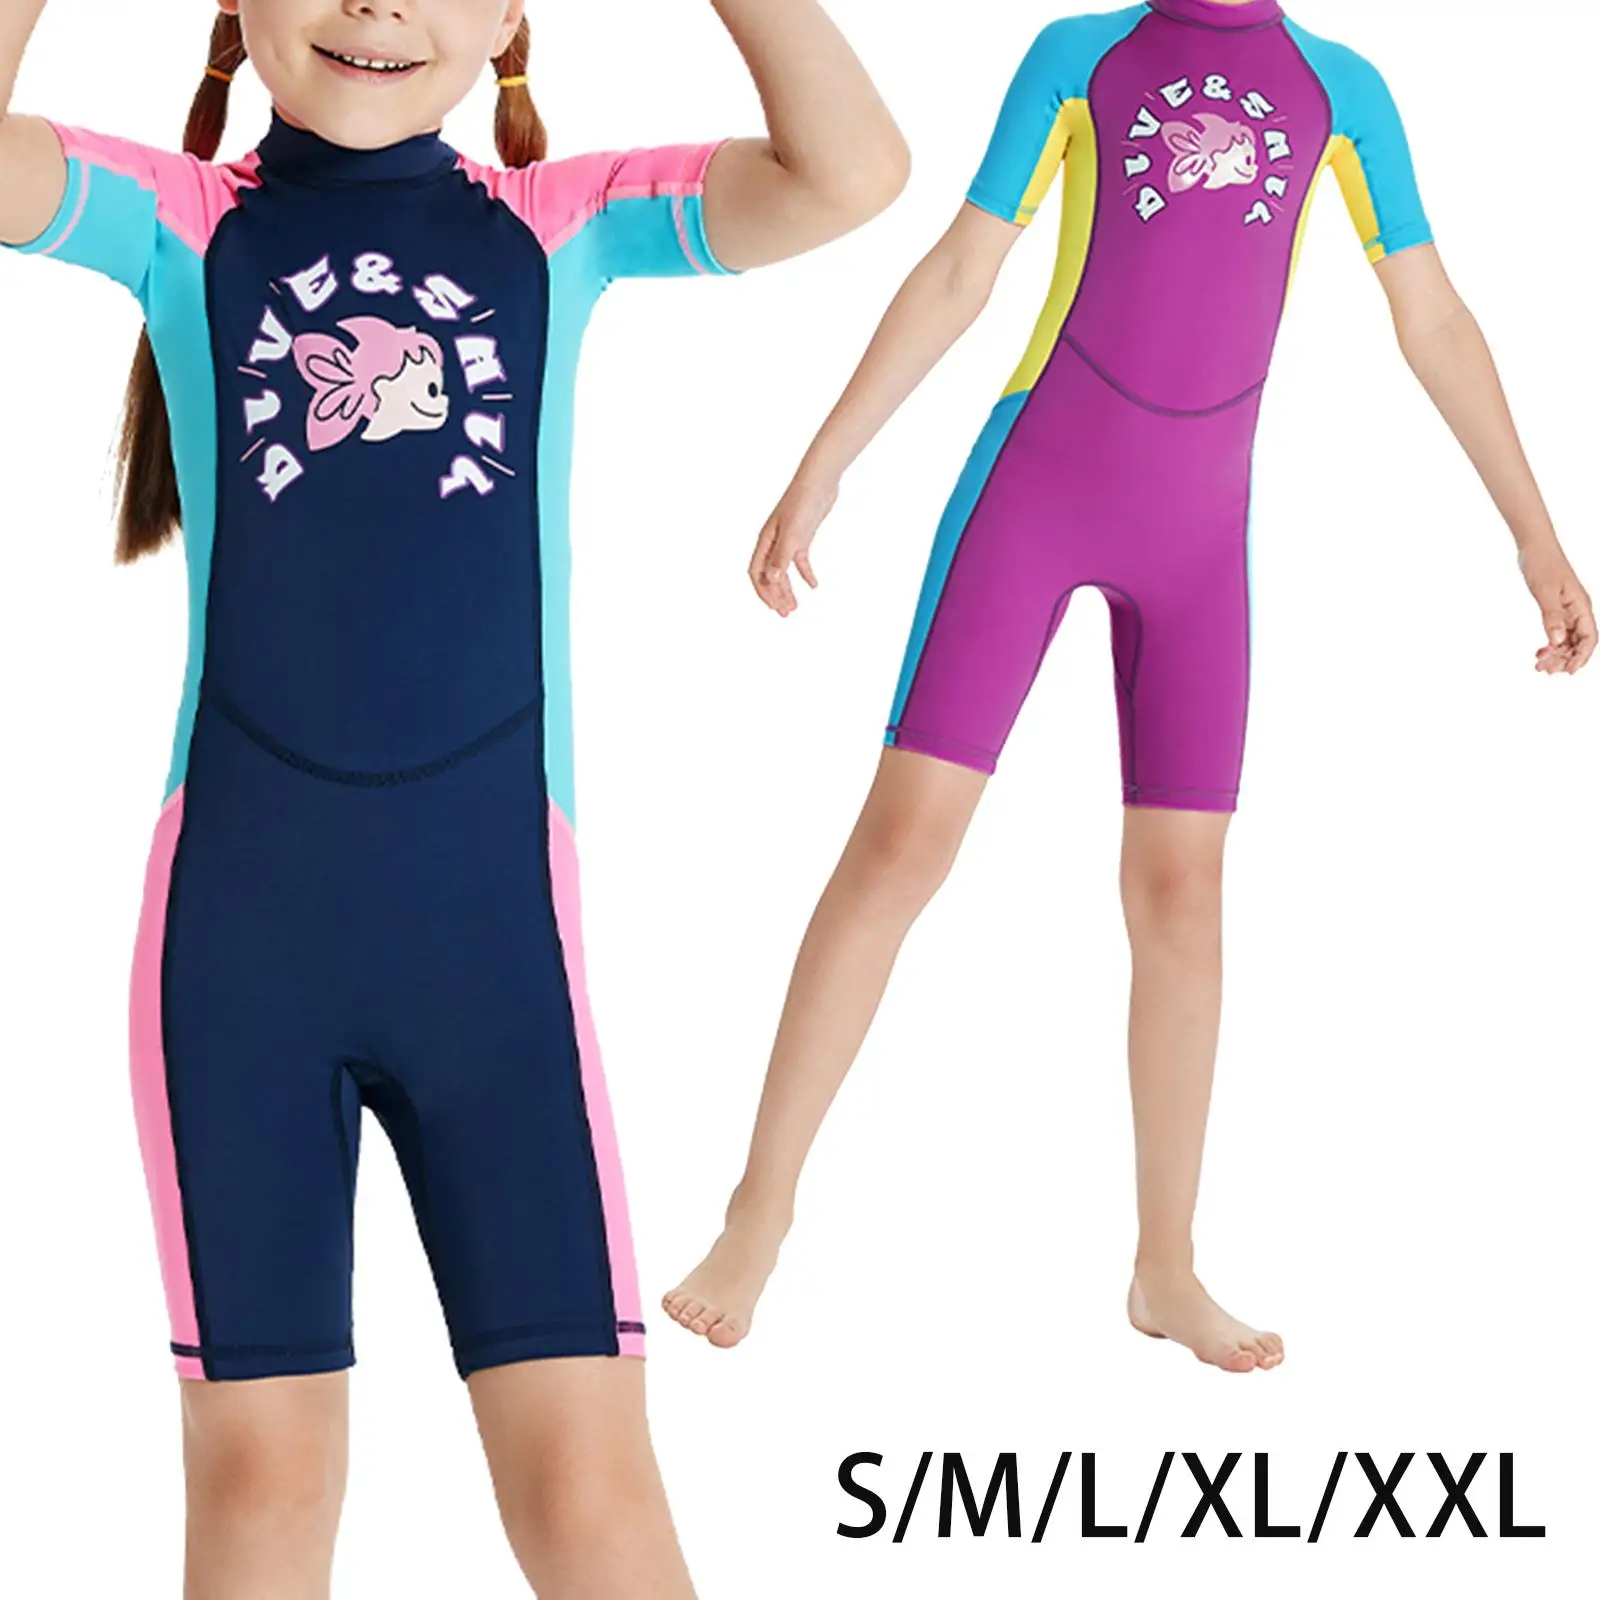 

Kids Swimsuits Quick Drying Short Sleeve Water Resistant Back Zipper Bathing Suit for Surfing Swimming Boating Sailing Kayaking